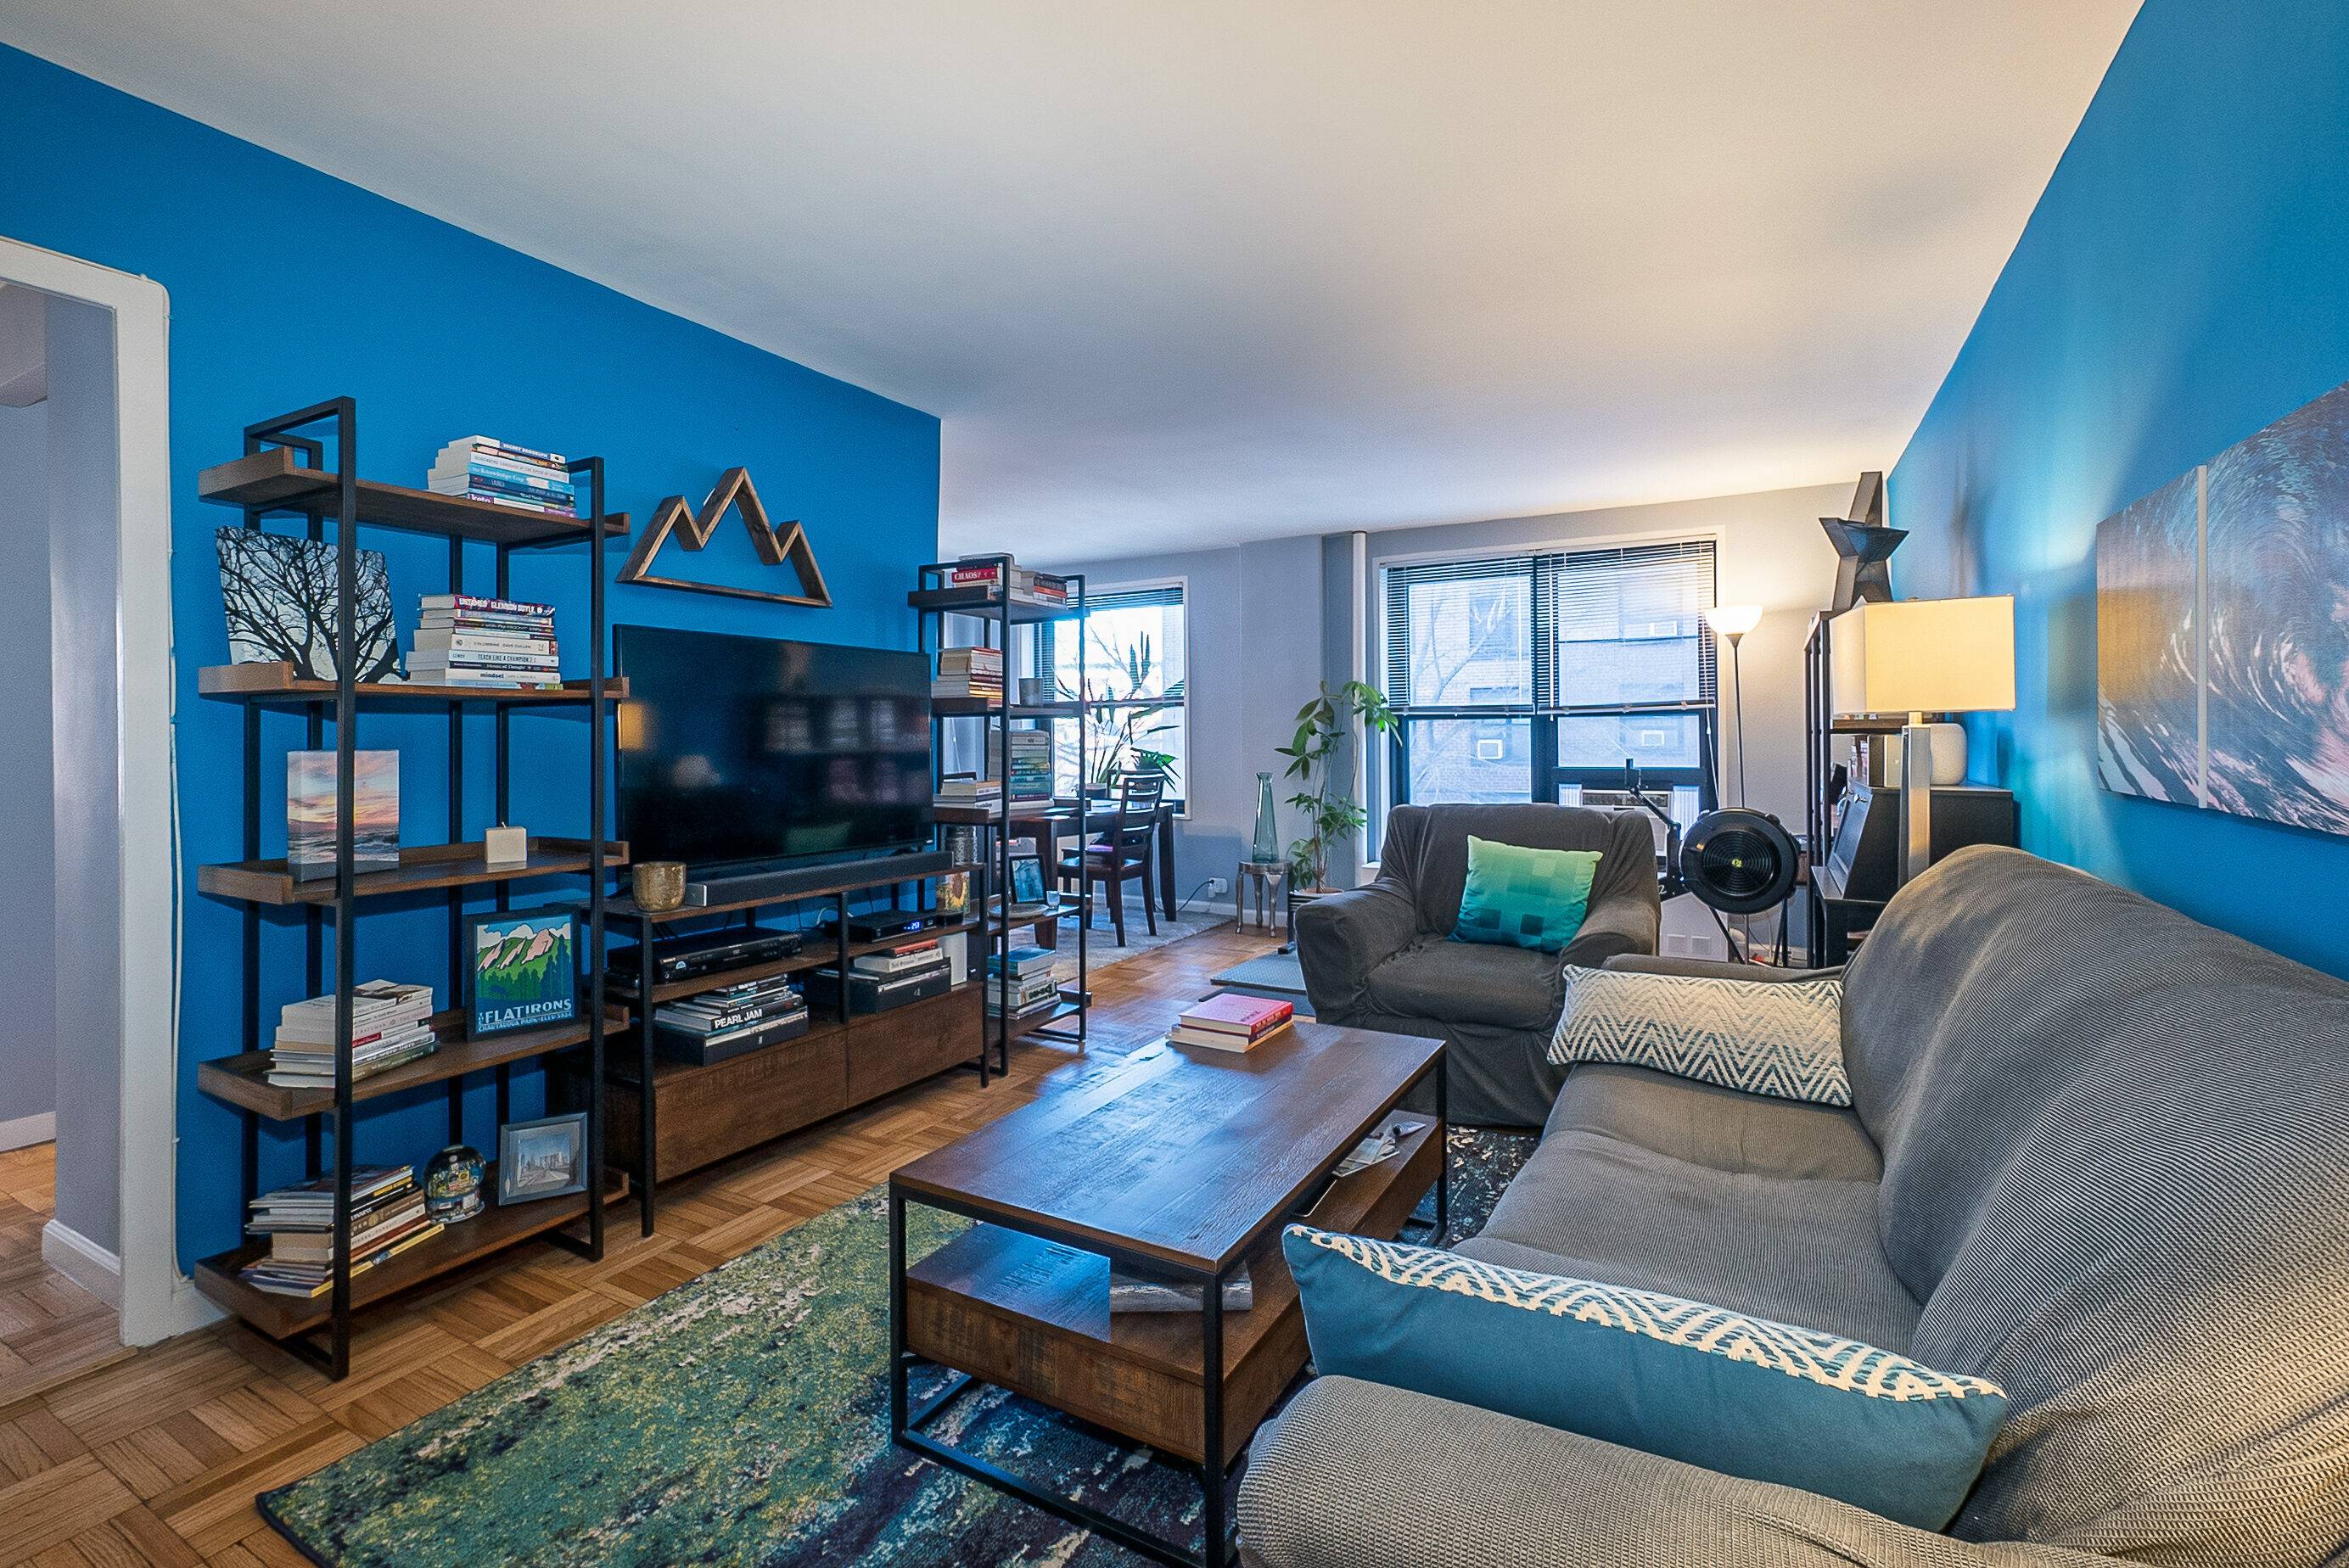 Welcome to this beautiful one bedroom, one bathroom in the prewar Clinton Hill Cooperative.